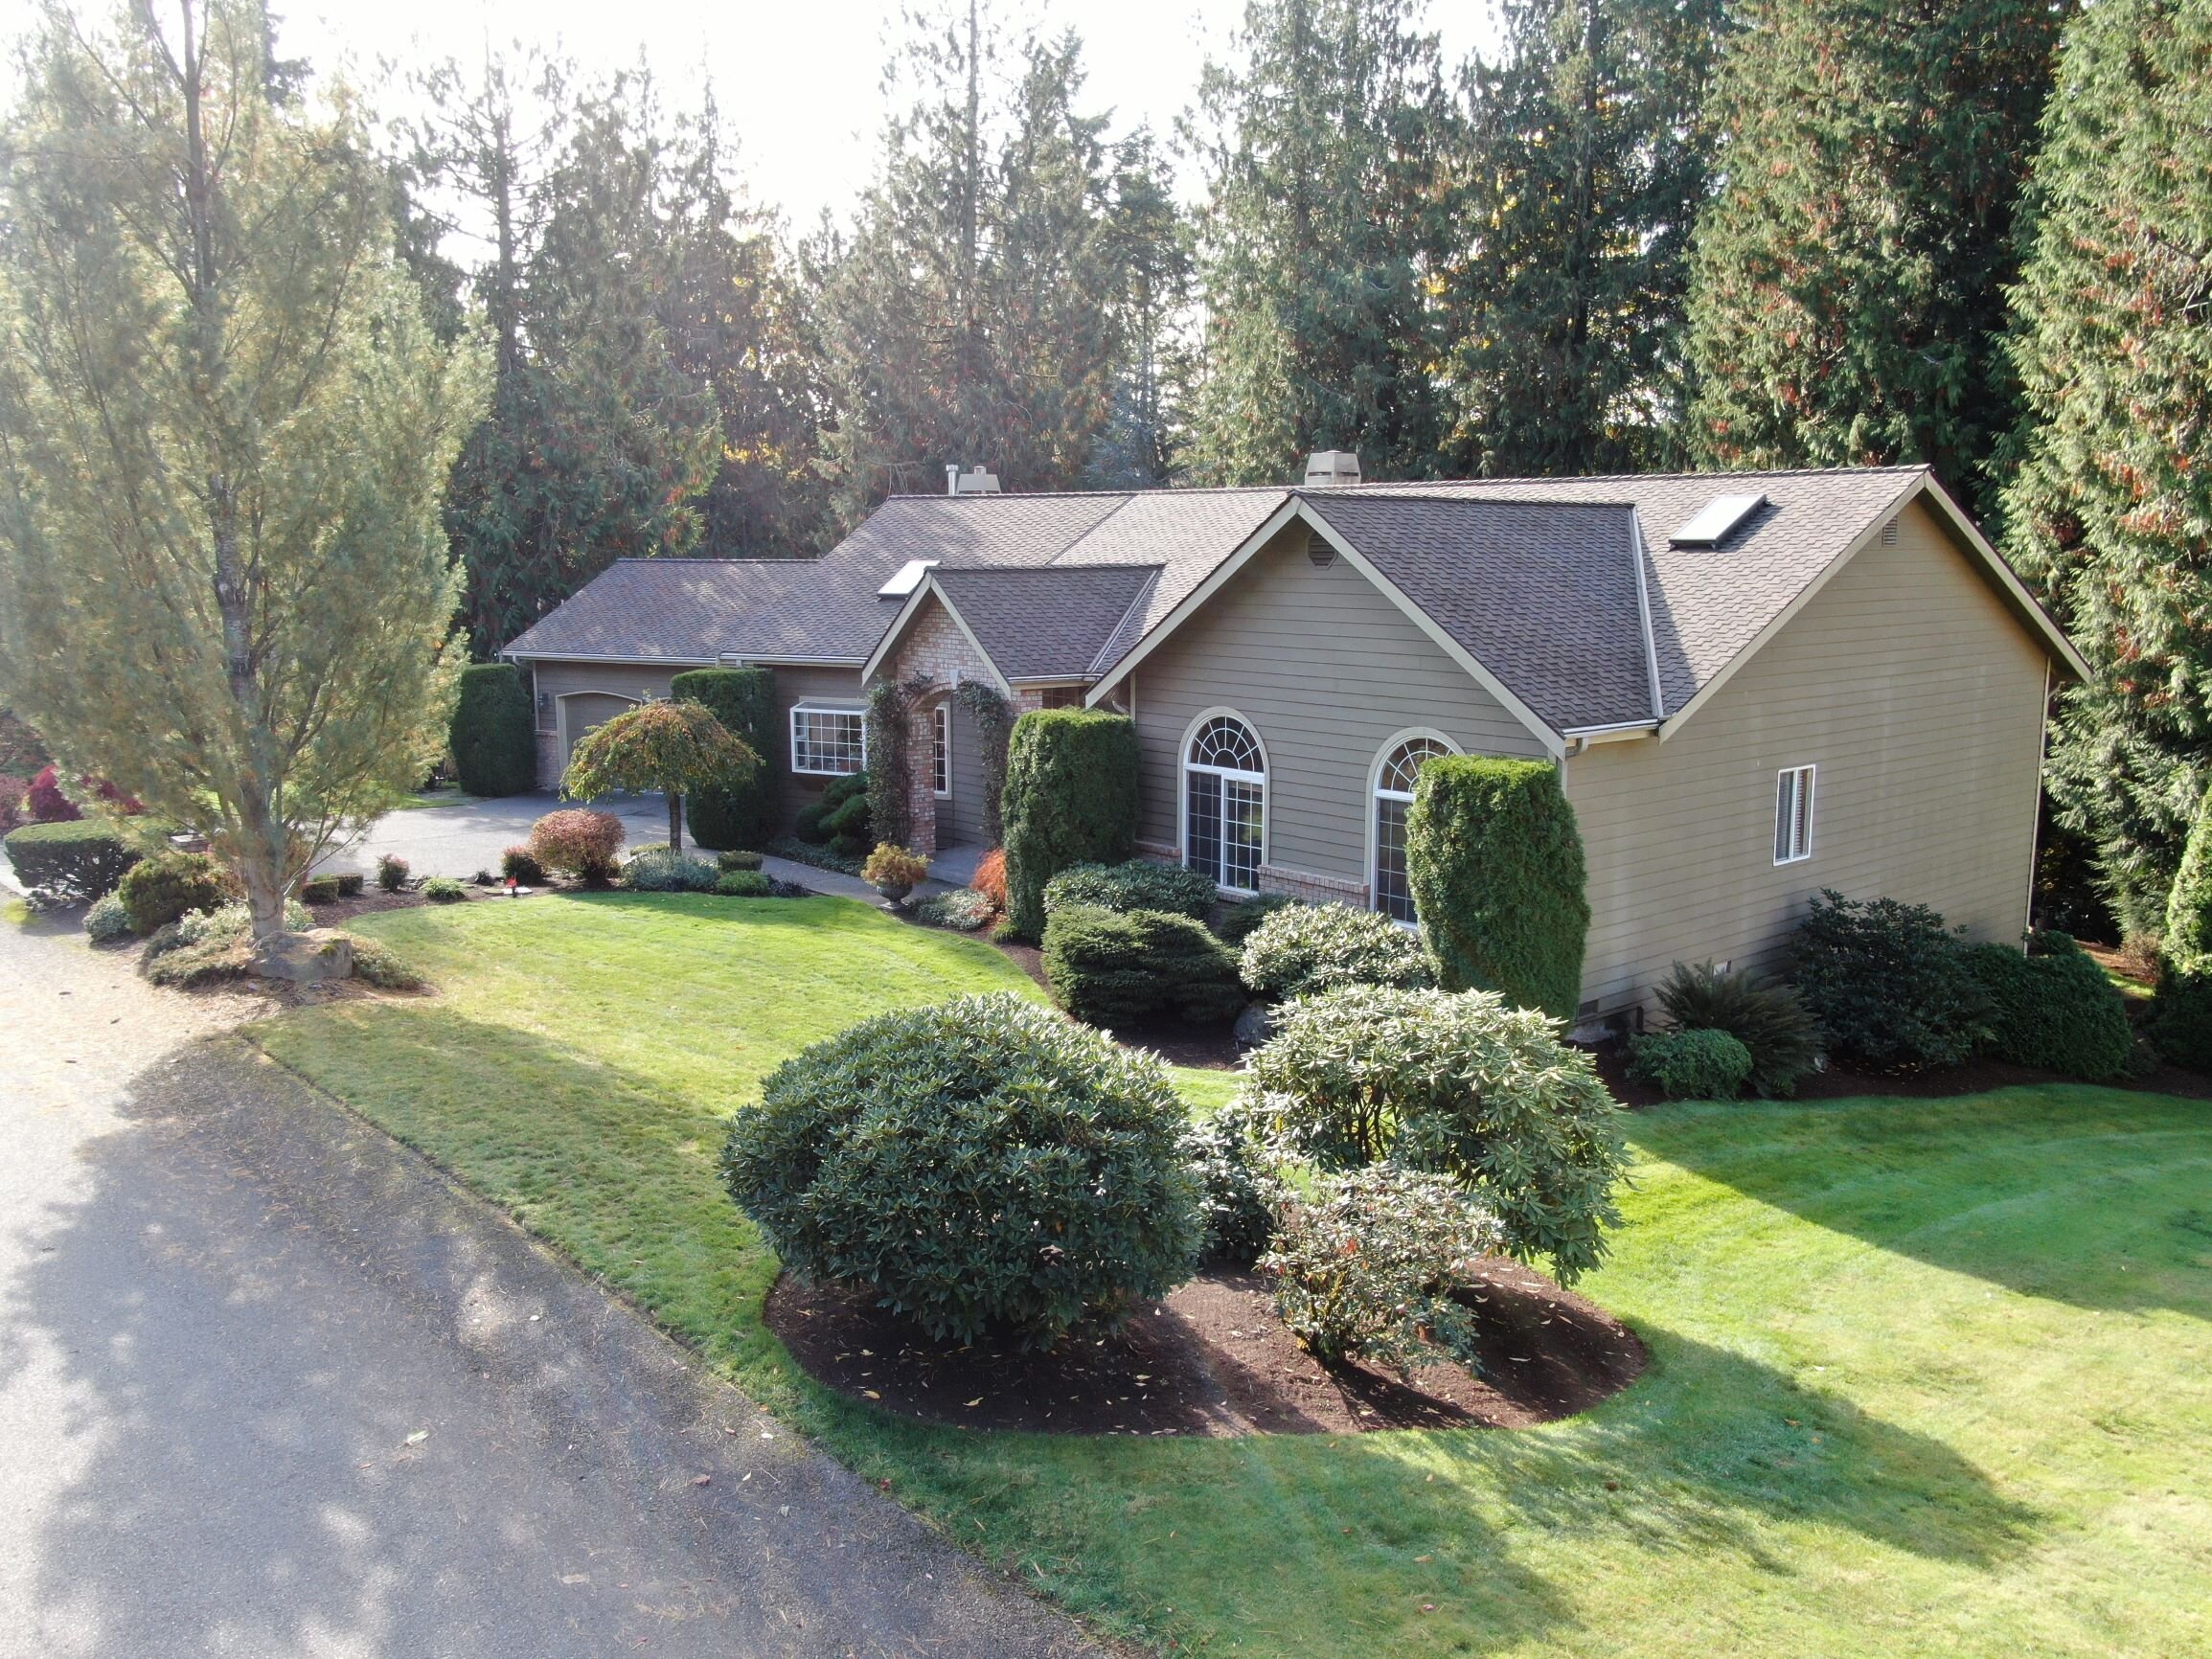 Sold! Woodinville Cottage Lake Area Rambler